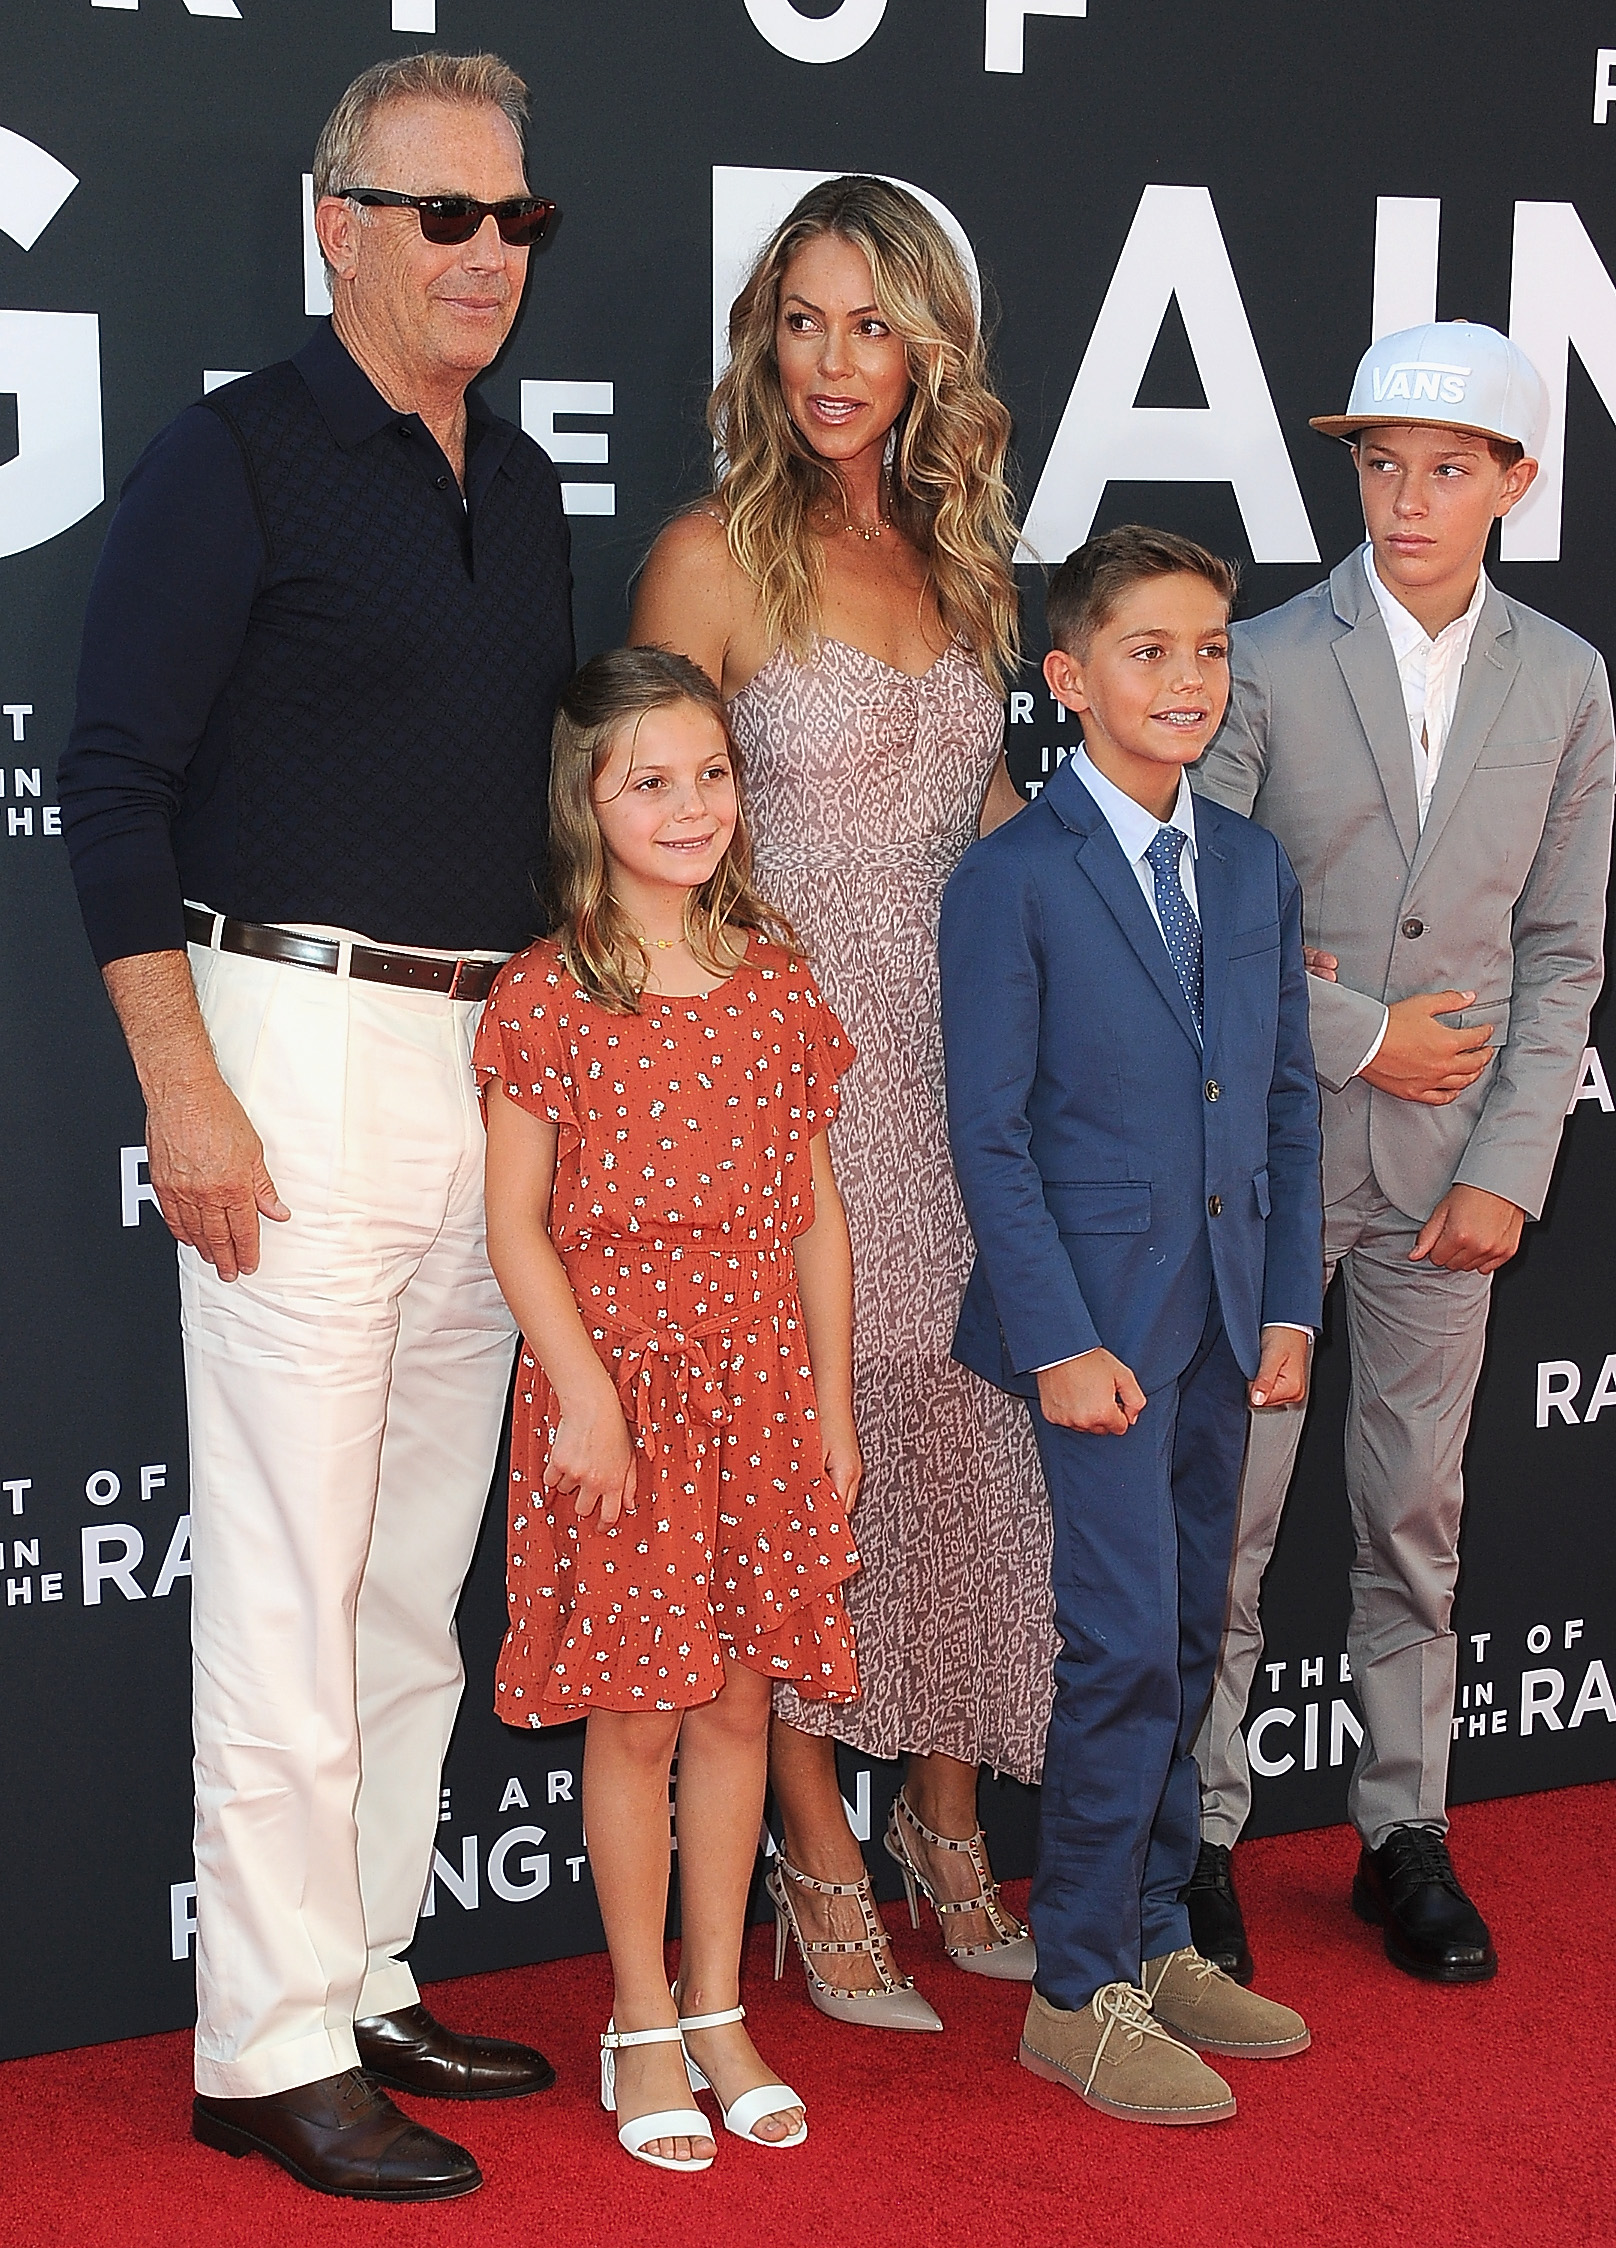 Grace Avery, Kevin, and Hayes Logan Costner, Christine Baumgartner, and Cayden Wyatt Costner at the premiere of "The Art of Racing In The Rain" on August 1, 2019, in Los Angeles, California | Source: Getty Images